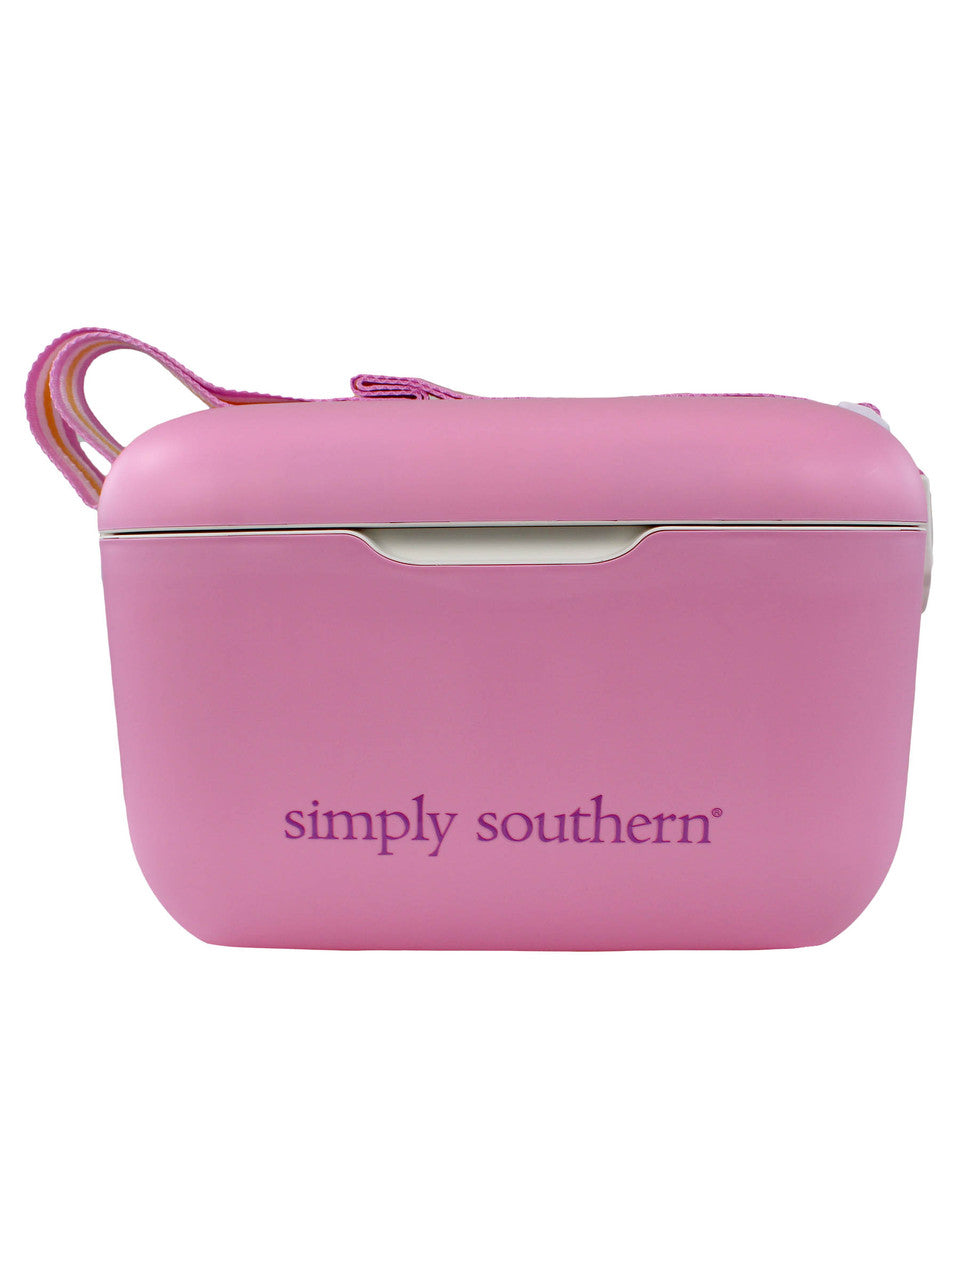 SIMPLY SOUTHERN 13QT COOLER LILAC - Molly's! A Chic and Unique Boutique 